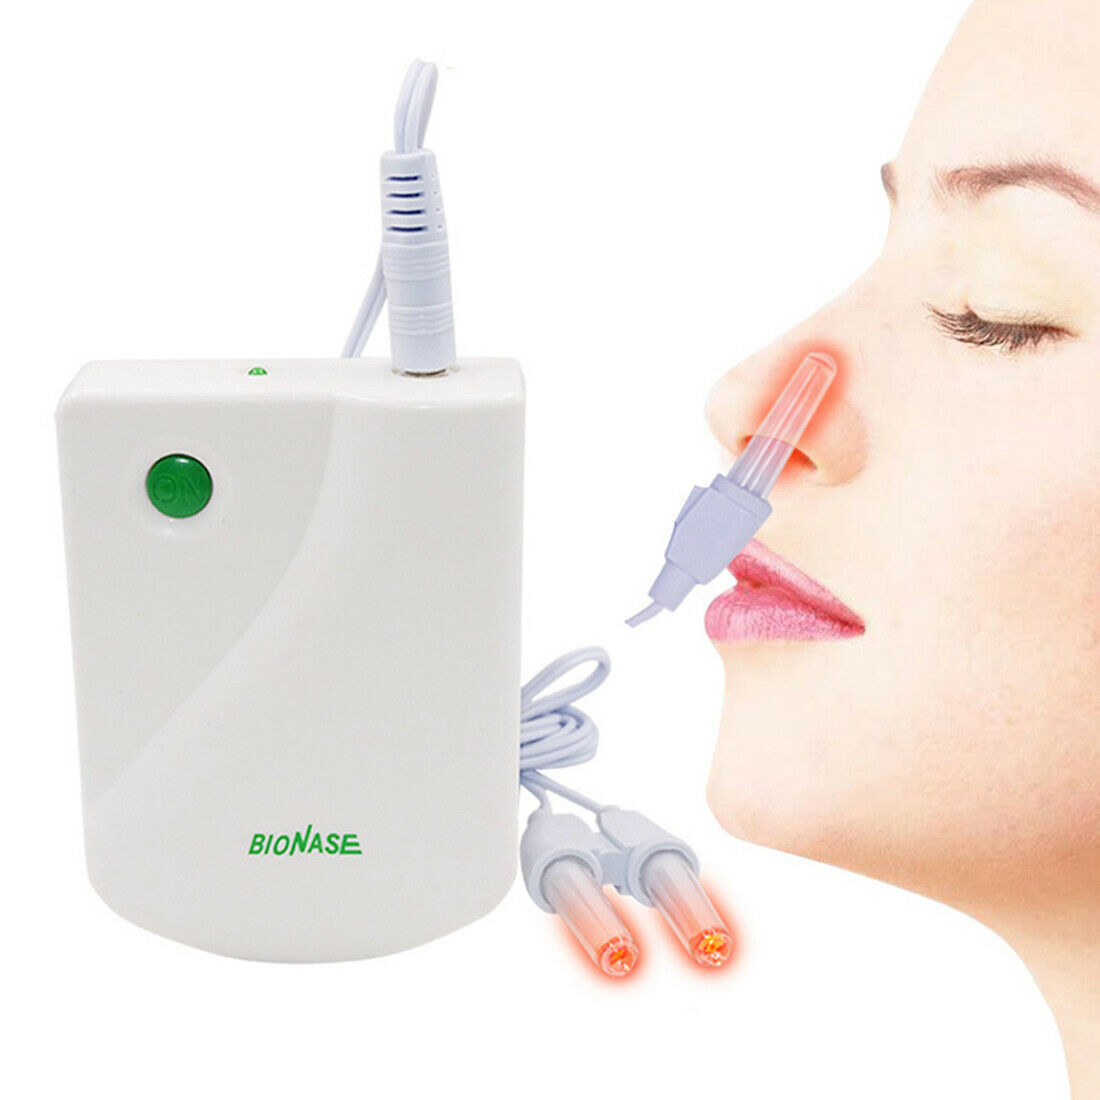 Bionase Nose Sinusiti Rhinitis Laser Cares Cure Hay Fever Therapy Massager/wire